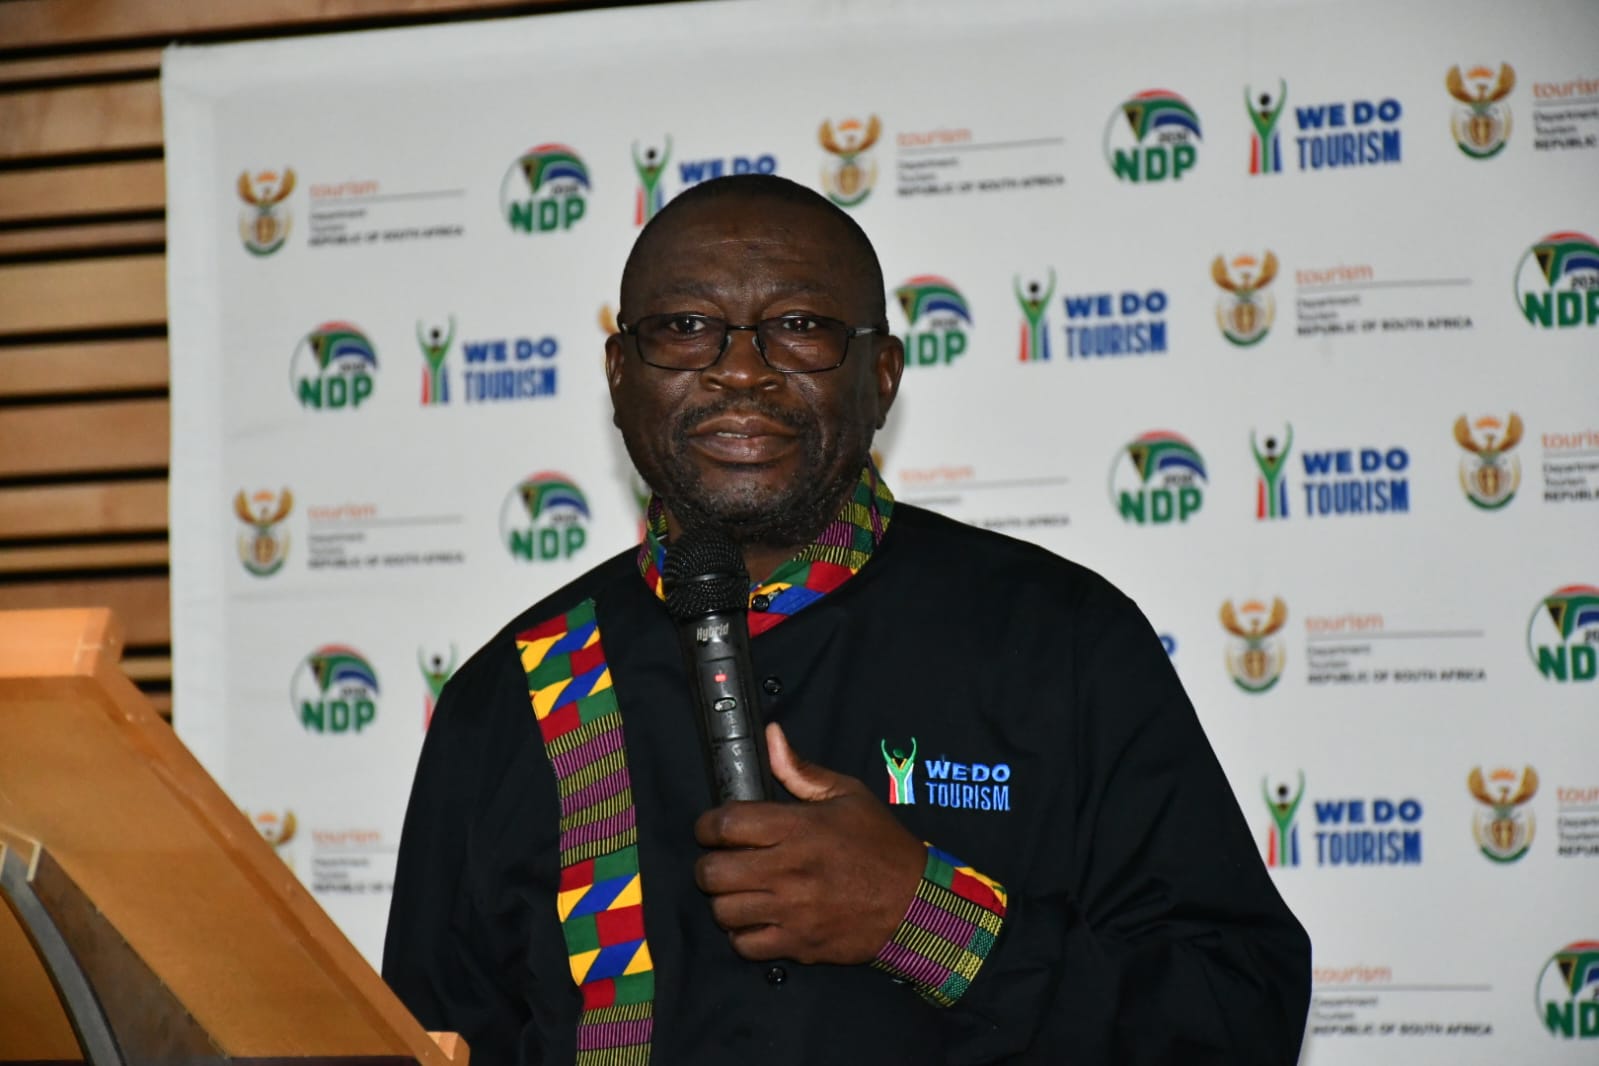 Address by Deputy Minister of Tourism, Fish Mahlalela to SMME Stakeholder Engagement in Skukuza, Kruger National Park